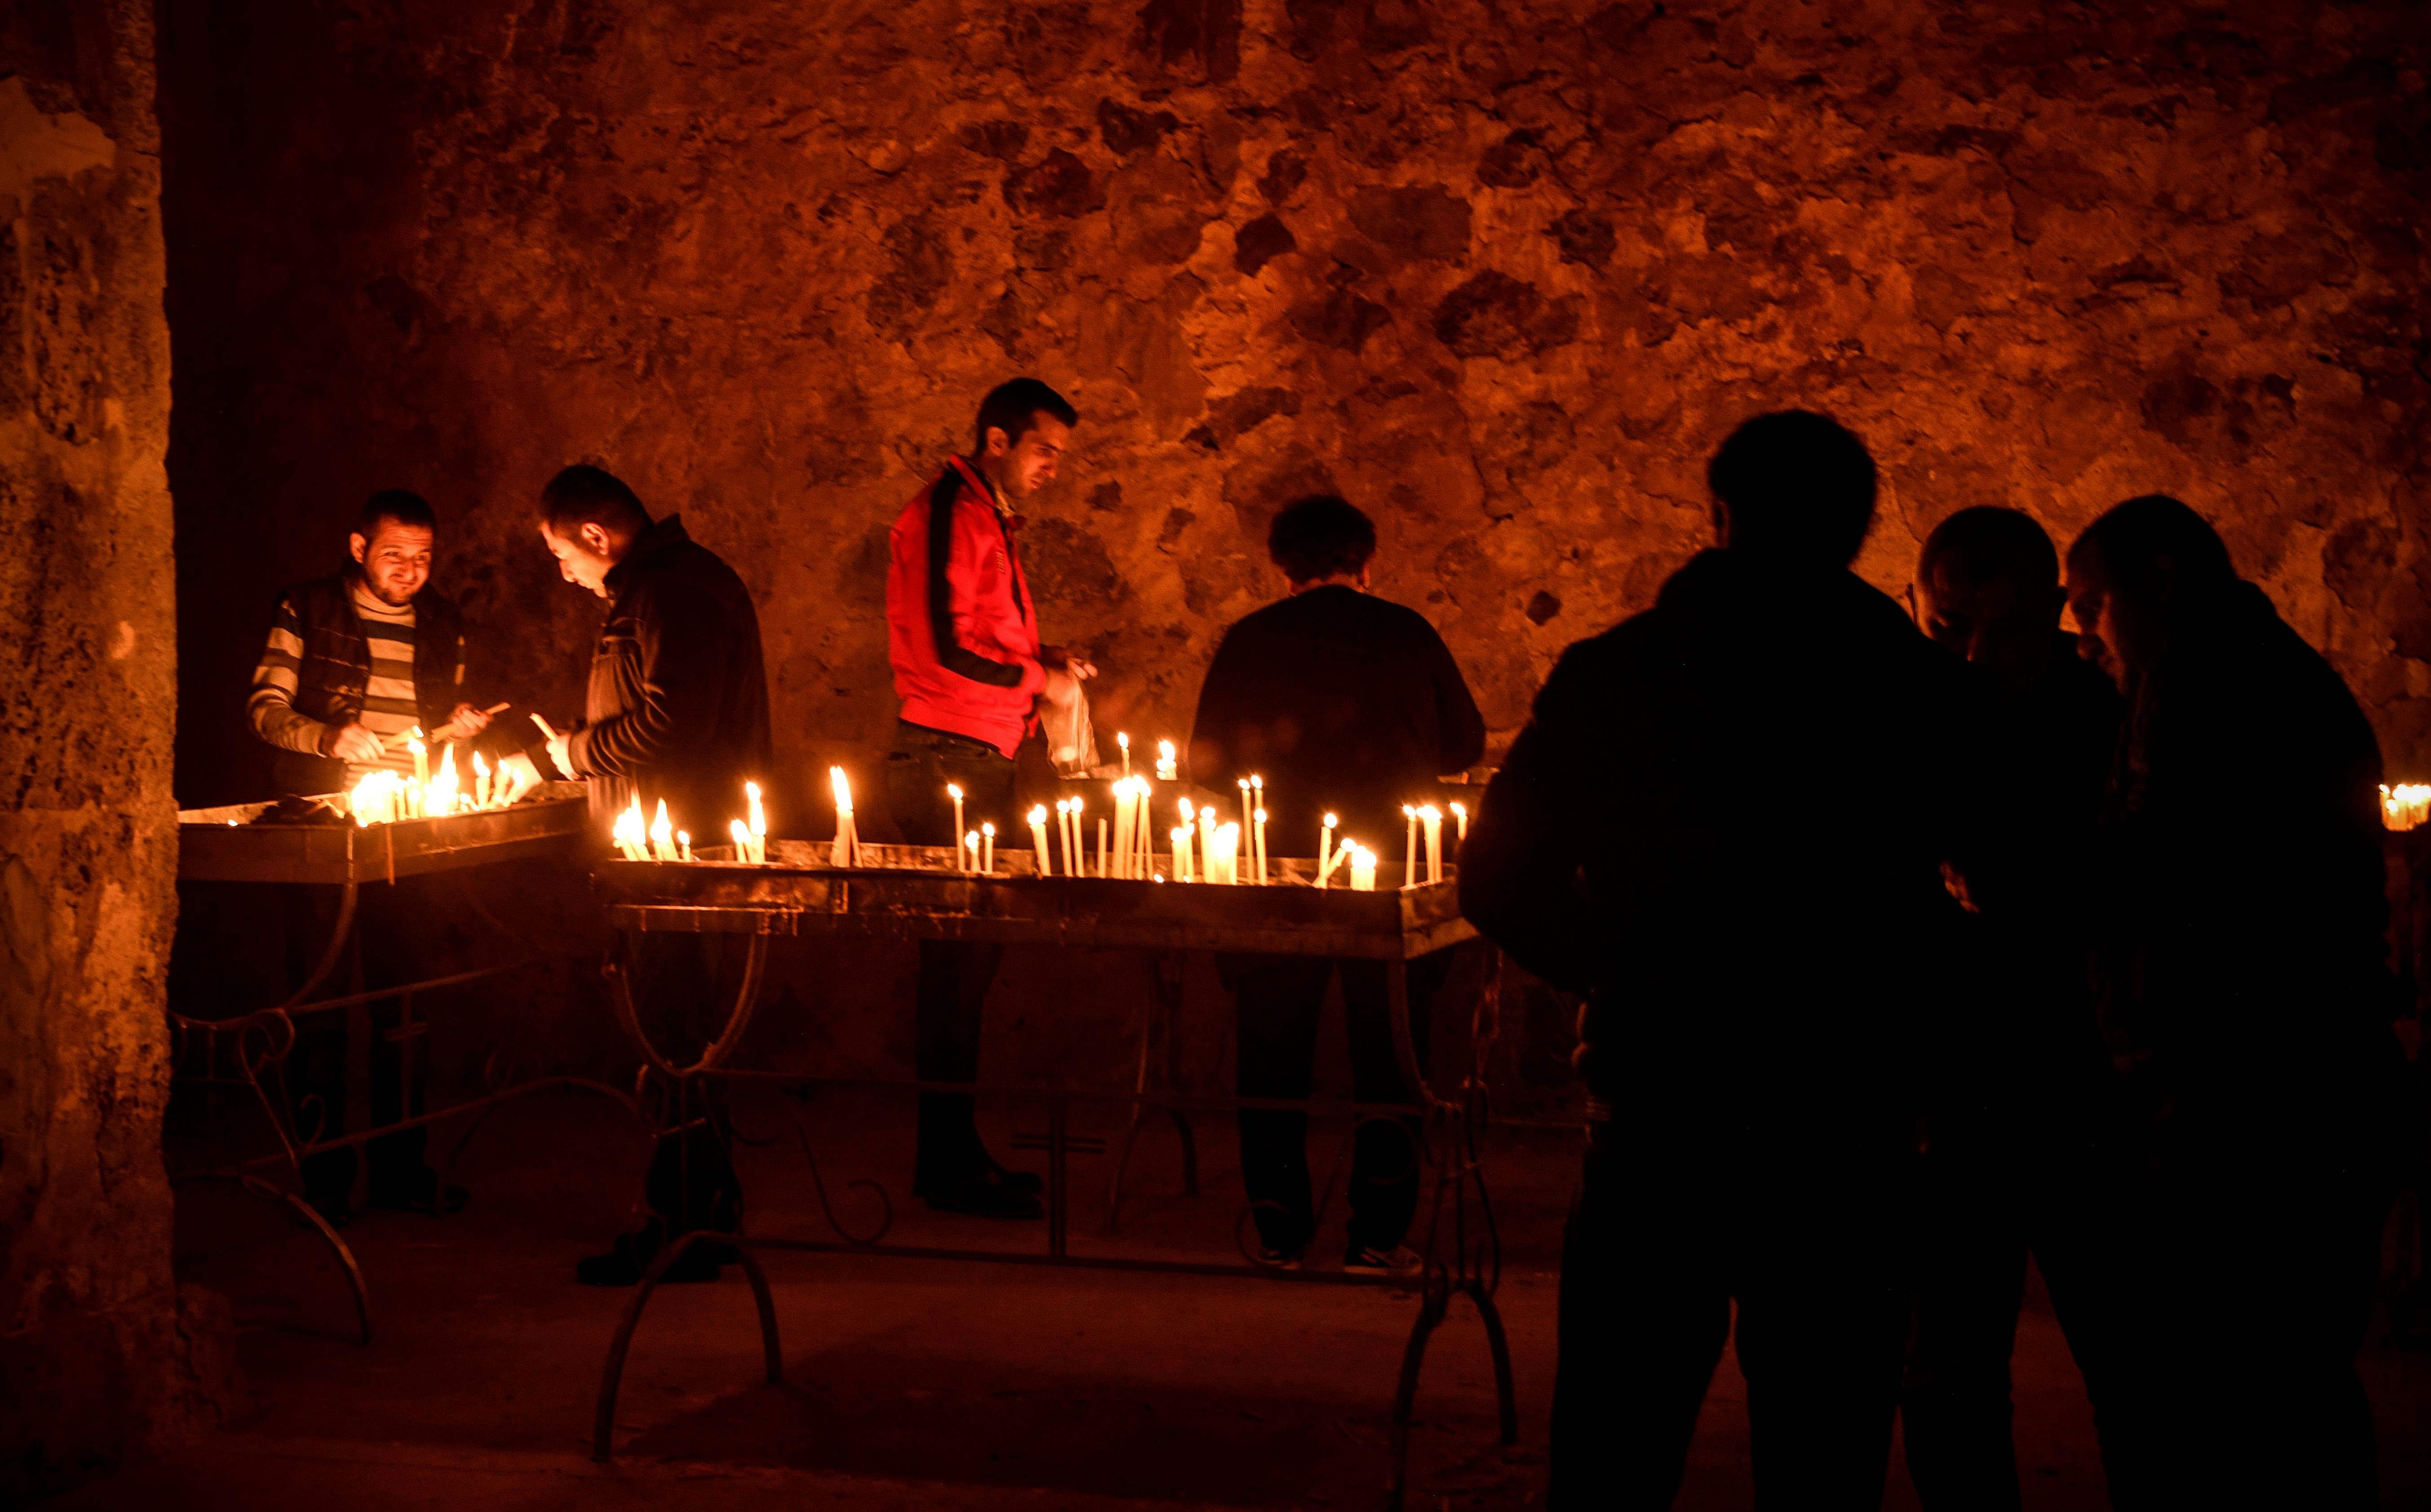 Armenian soldiers light candles as they pay a final tribute to comrades fallen during the military conflict between Armenia and Azerbaijan over the breakaway region of Nagorno-Karabakhat the Orthodox Dadivank Monastery on the outskirts of Kalbajar. Credits: AFP Photo